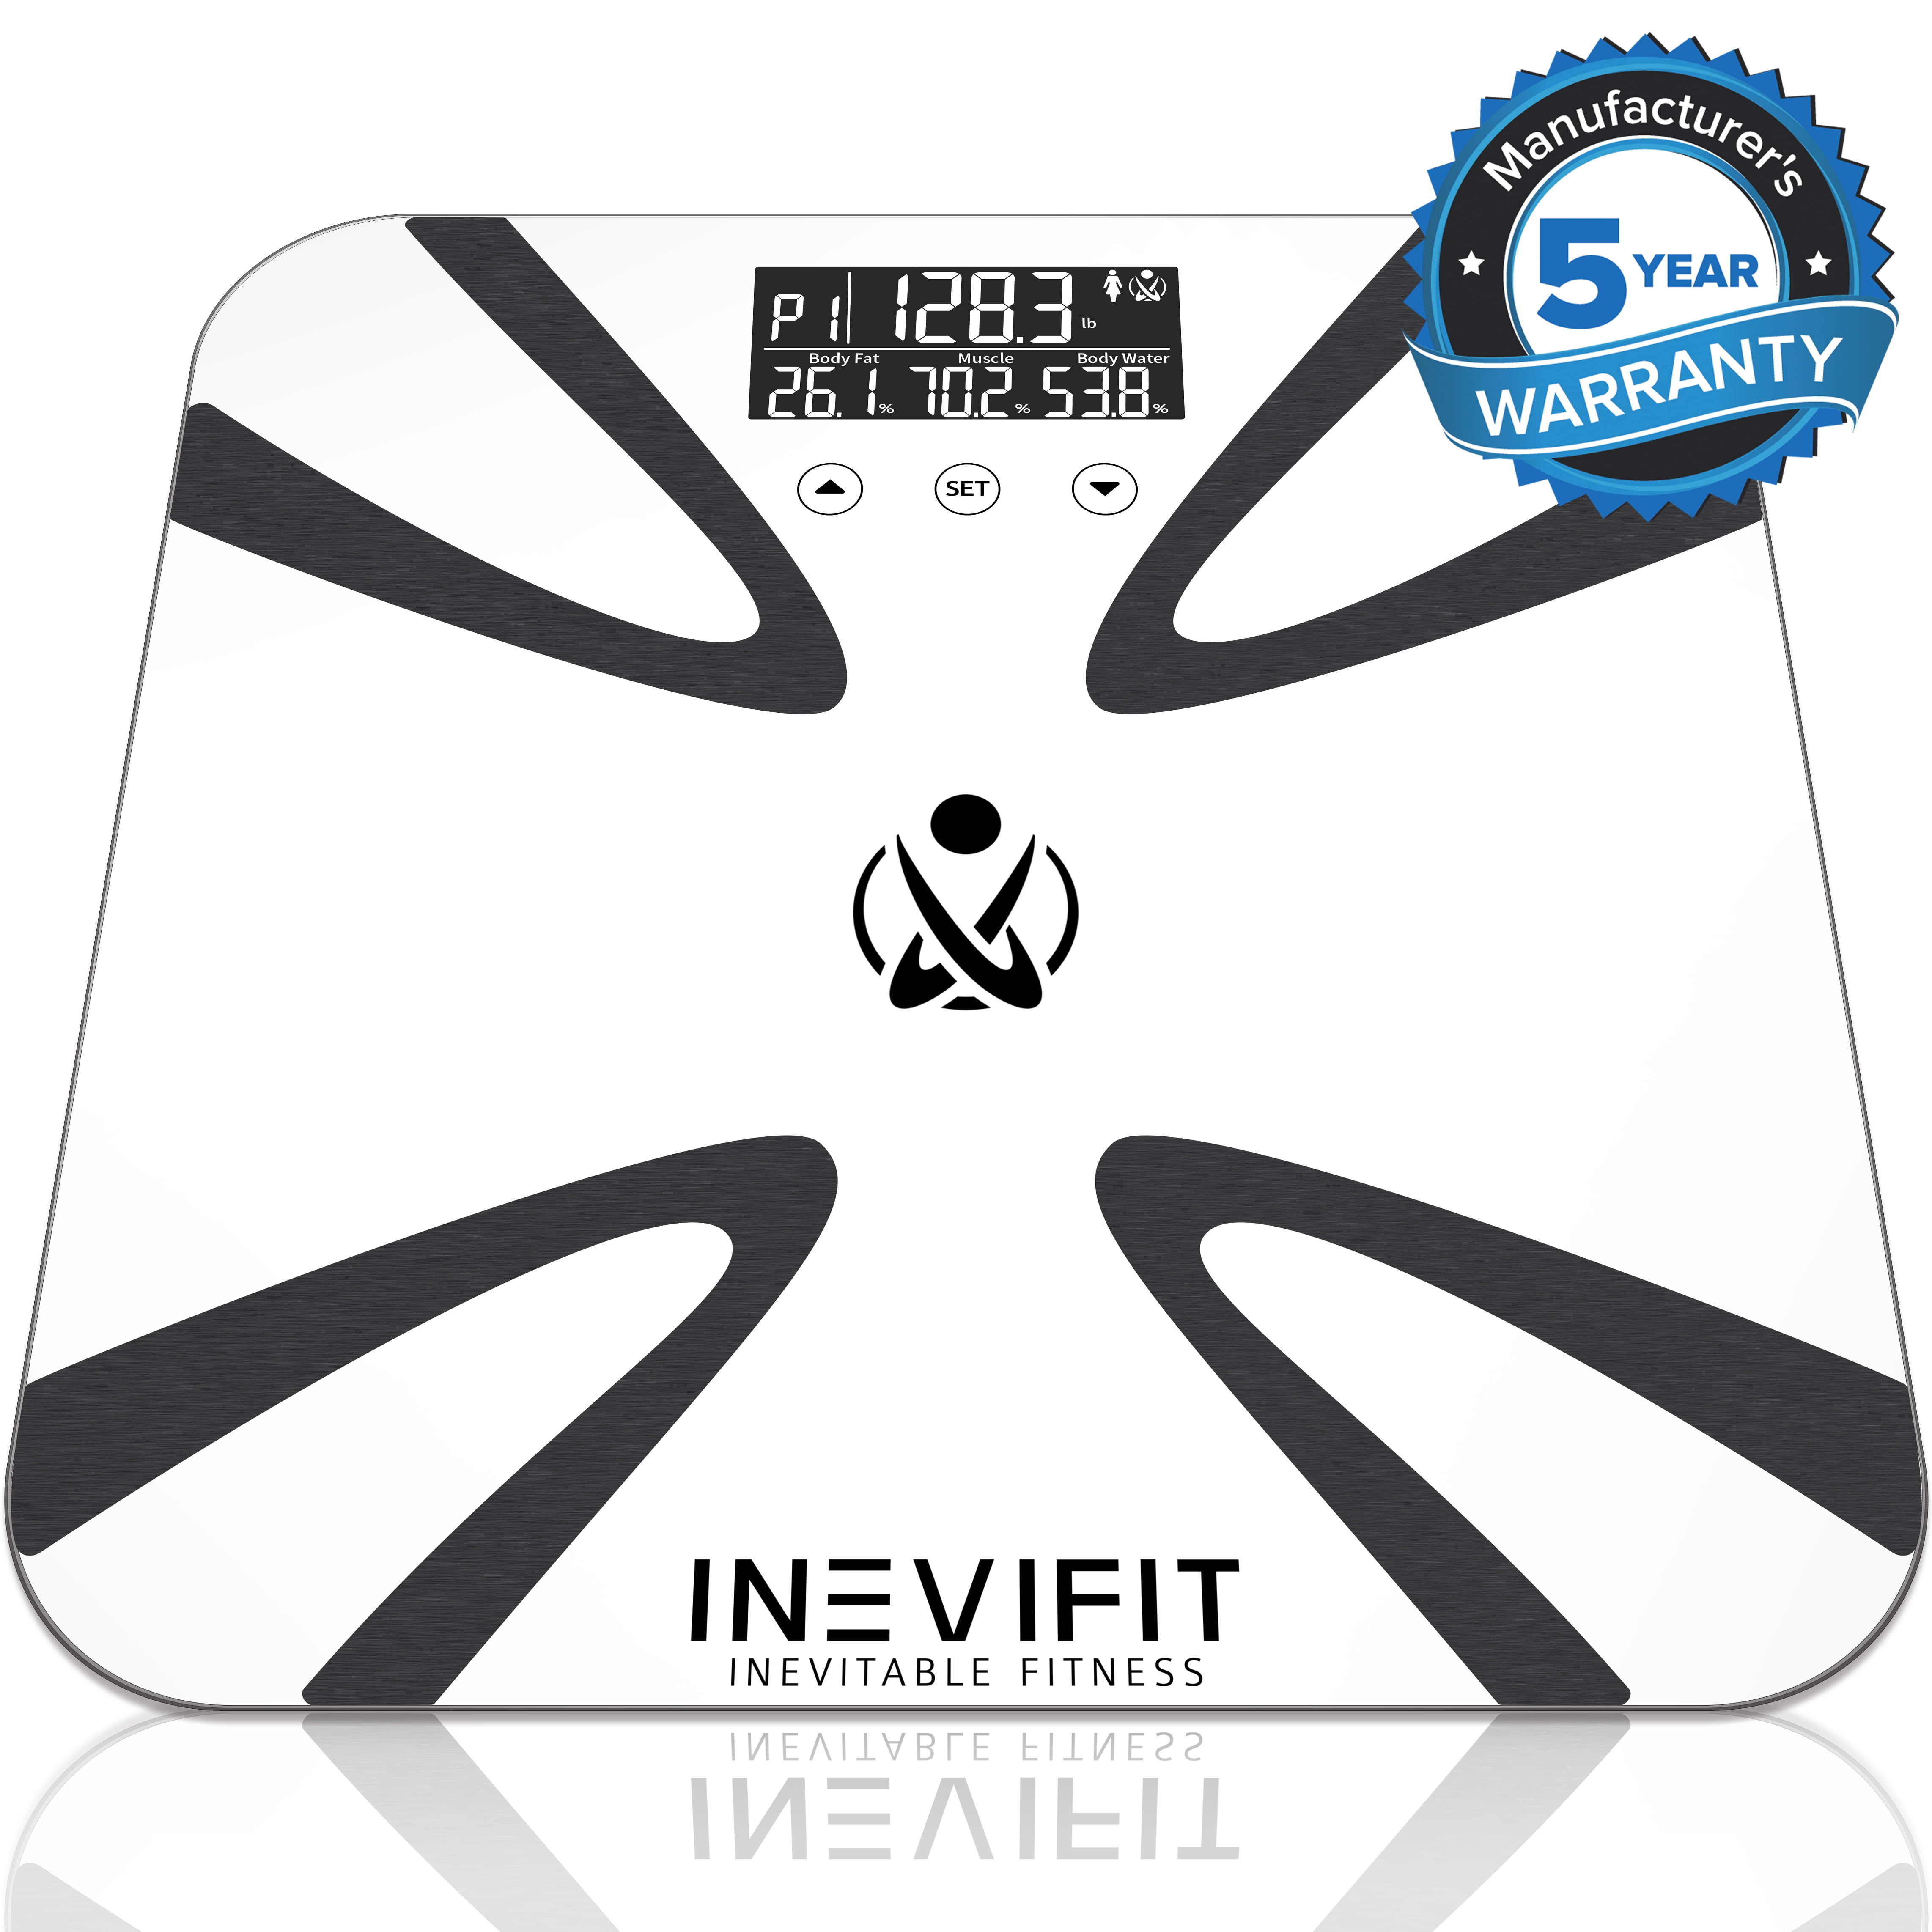 INEVIFIT Body Fat Scale, Highly Accurate Digital Bathroom Body Composition  Analyzer, Measures Weight, Body Fat, Water, Muscle, BMI, Visceral Levels 